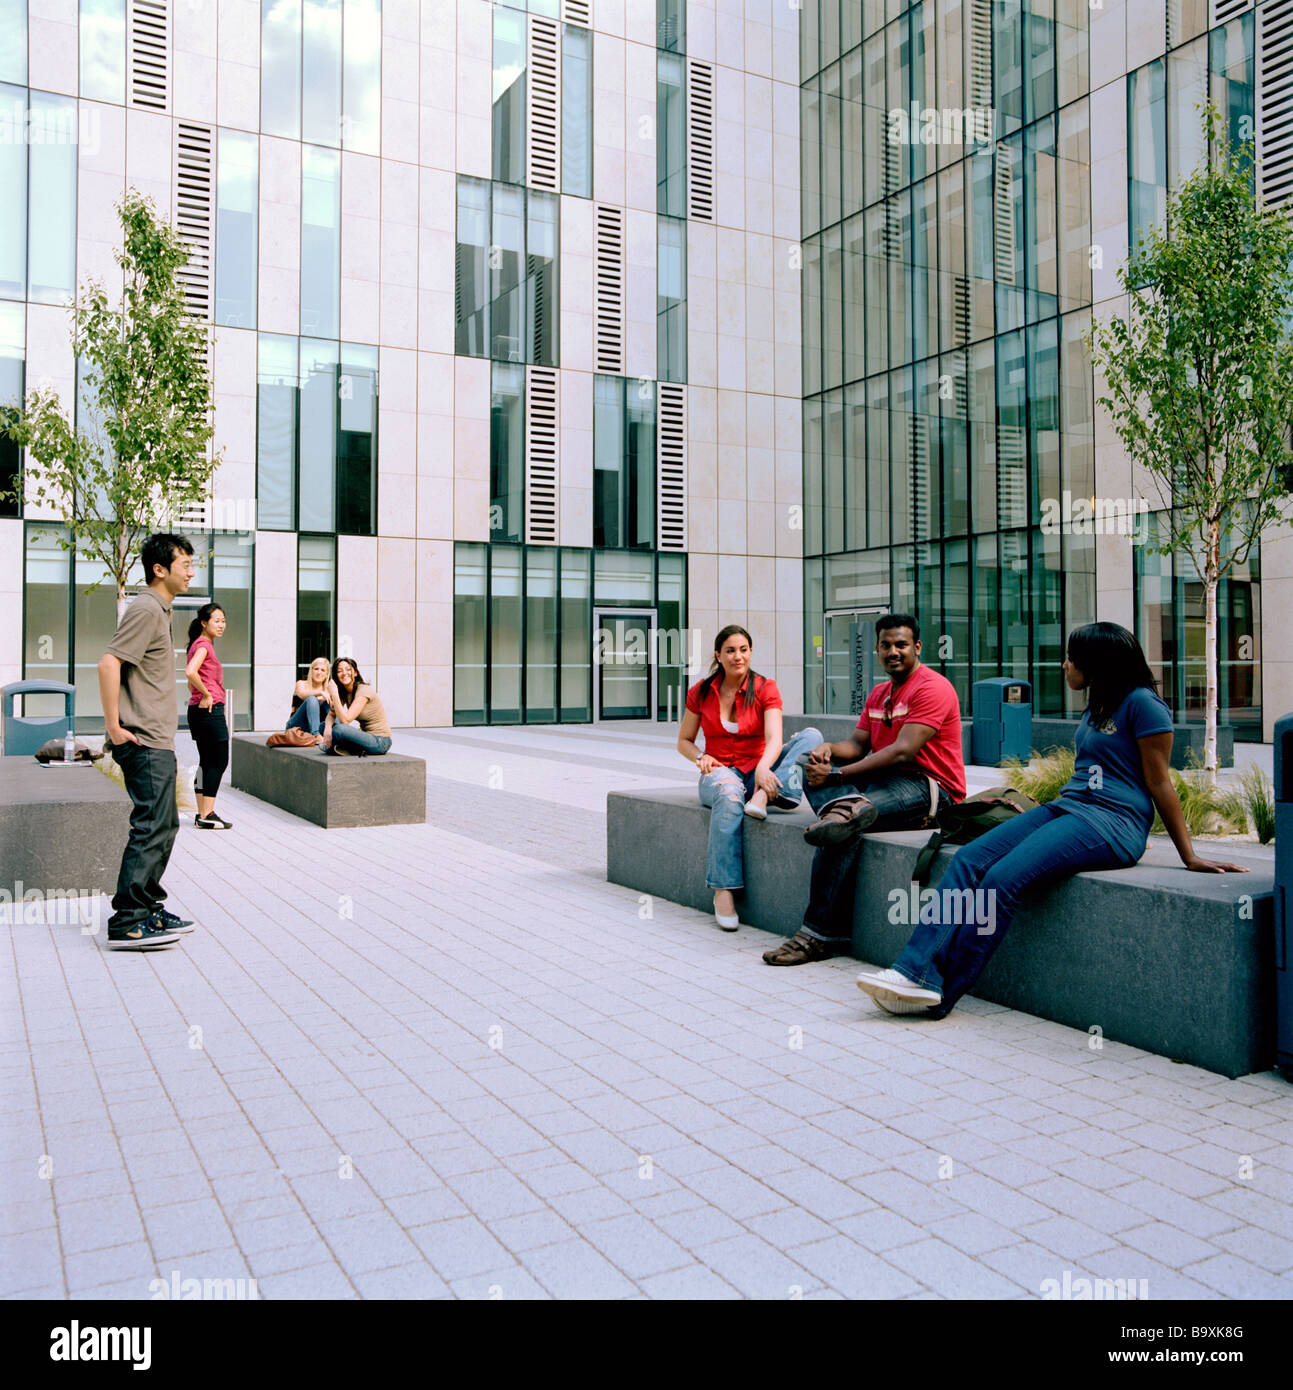 University campus, building, young students hanging out, taking it easy in between class and lectures Stock Photo